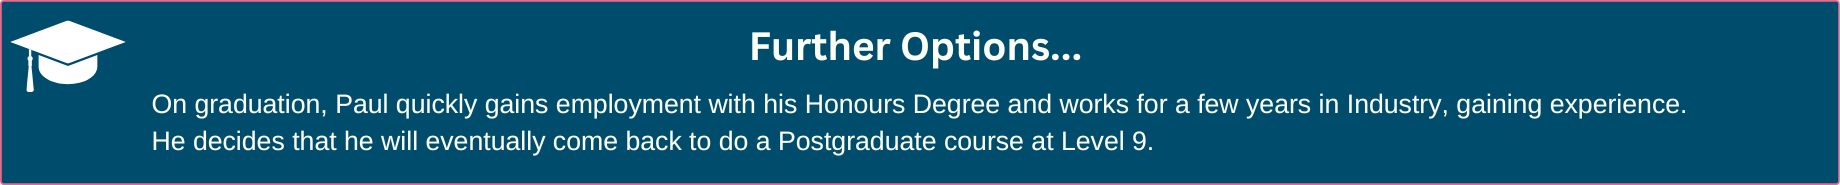 Further Options...  On graduation, Paul quickly gains employment with his Honours Degree and works for a few years in Industry, gaining experience.  He decides that he will eventually come back to do a Postgraduate course at Level 9.